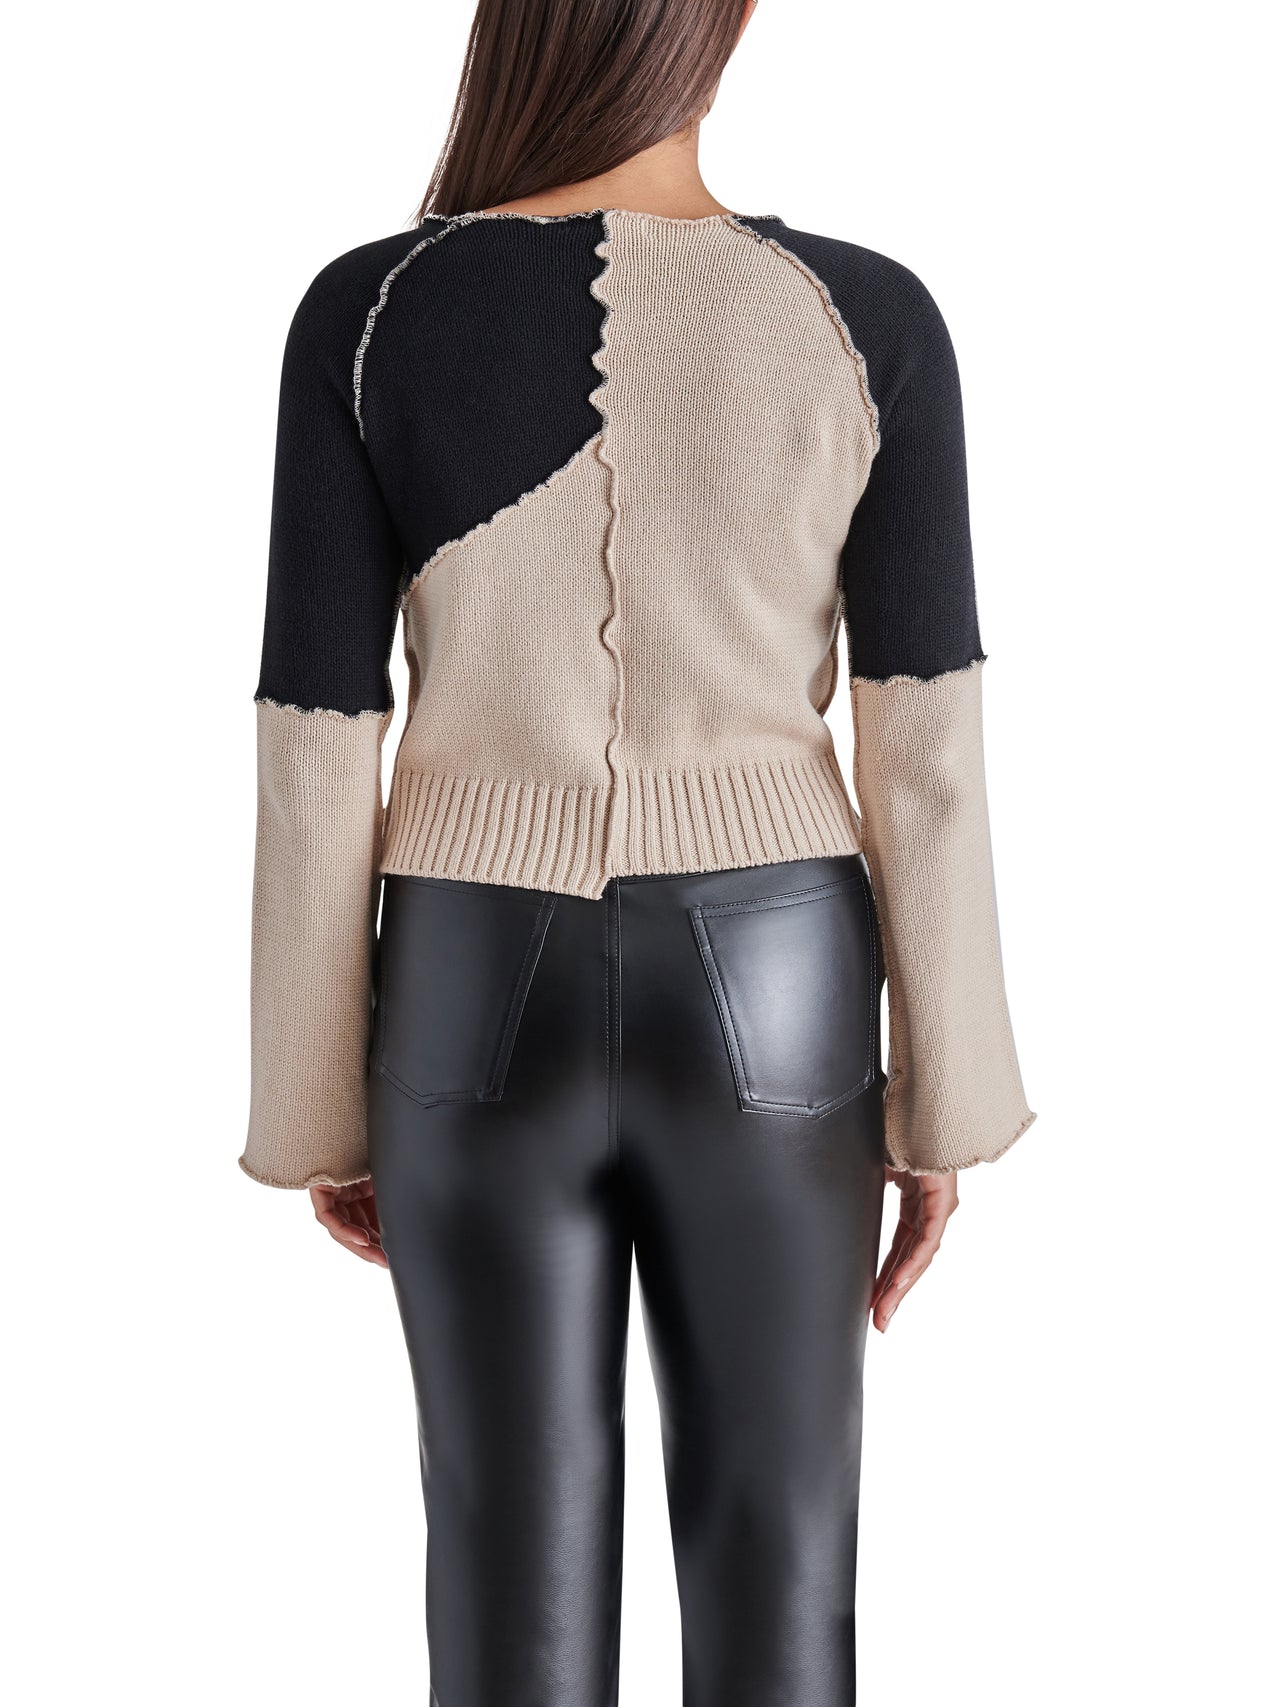 Rylee Asymmetrical Colorblock Sweater, Sweater by Steve Madden | LIT Boutique